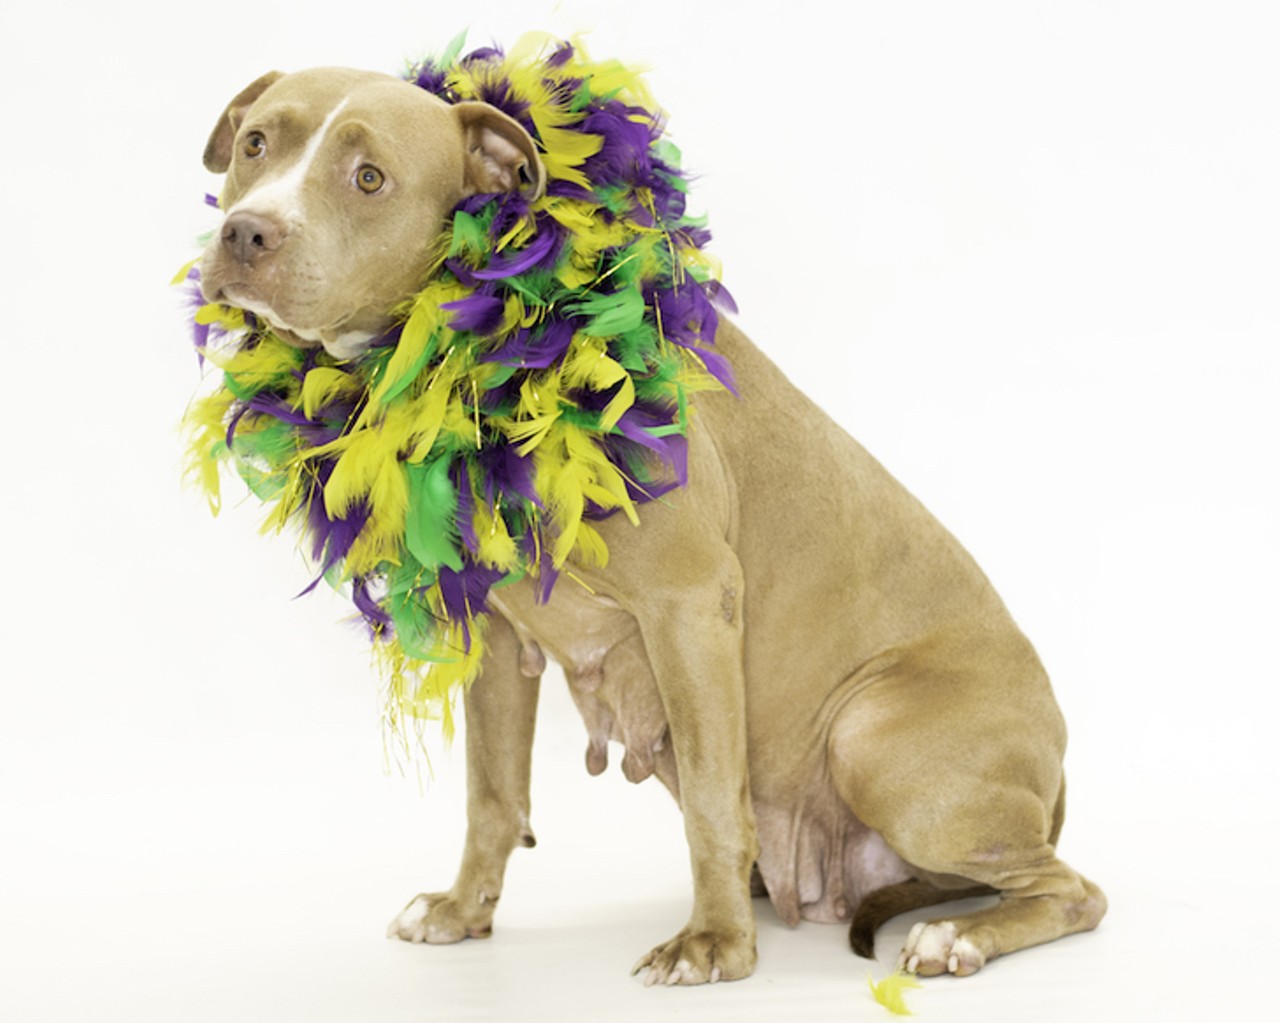 21 adoptable dogs who would love to dress up with you this Halloween